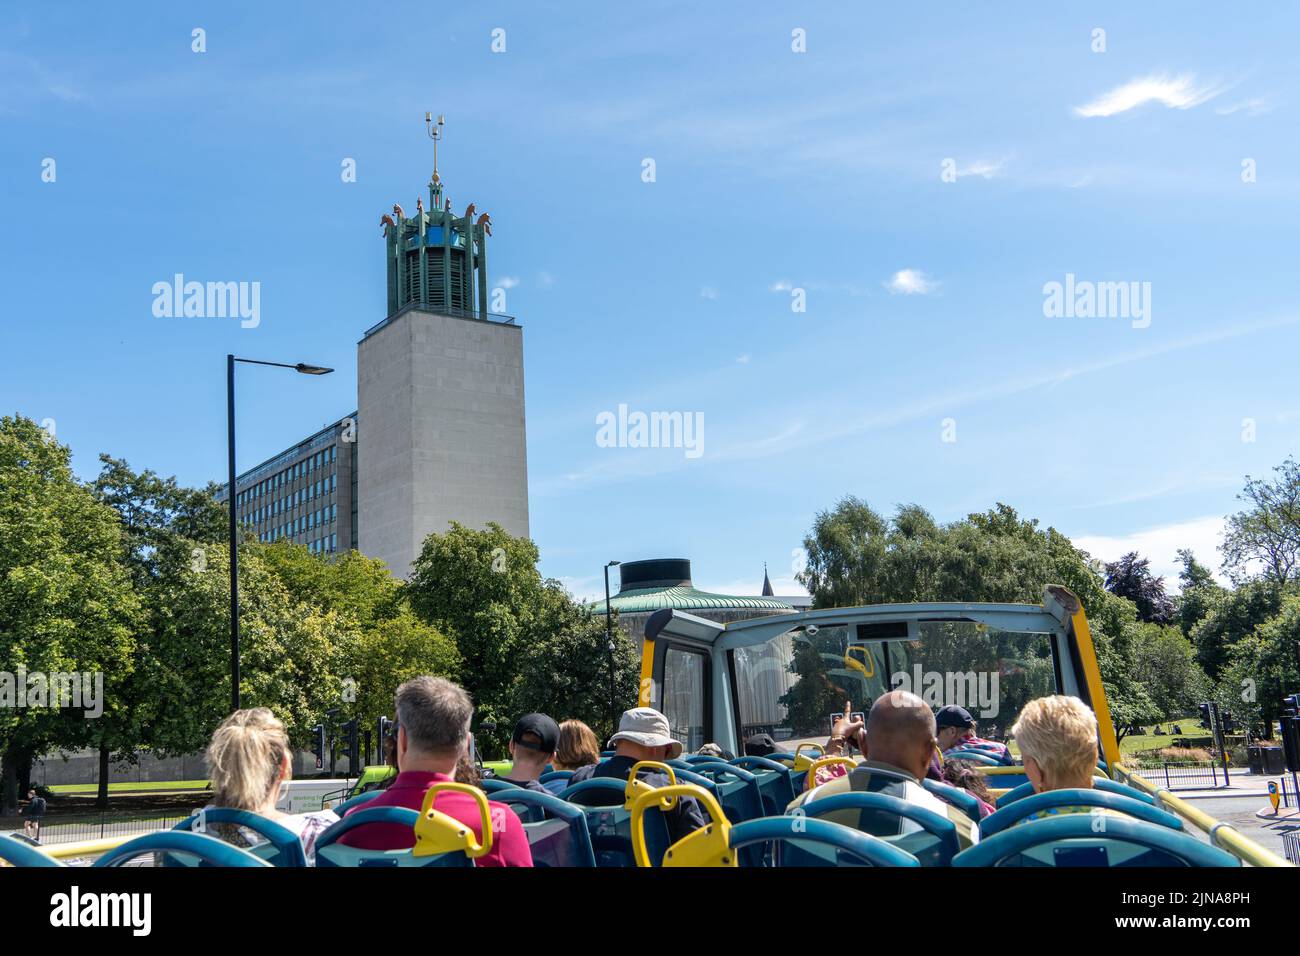 Travelling around the city of Newcastle upon Tyne, UK on the Toon Tour sightseeing bus, on a sunny day. Stock Photo